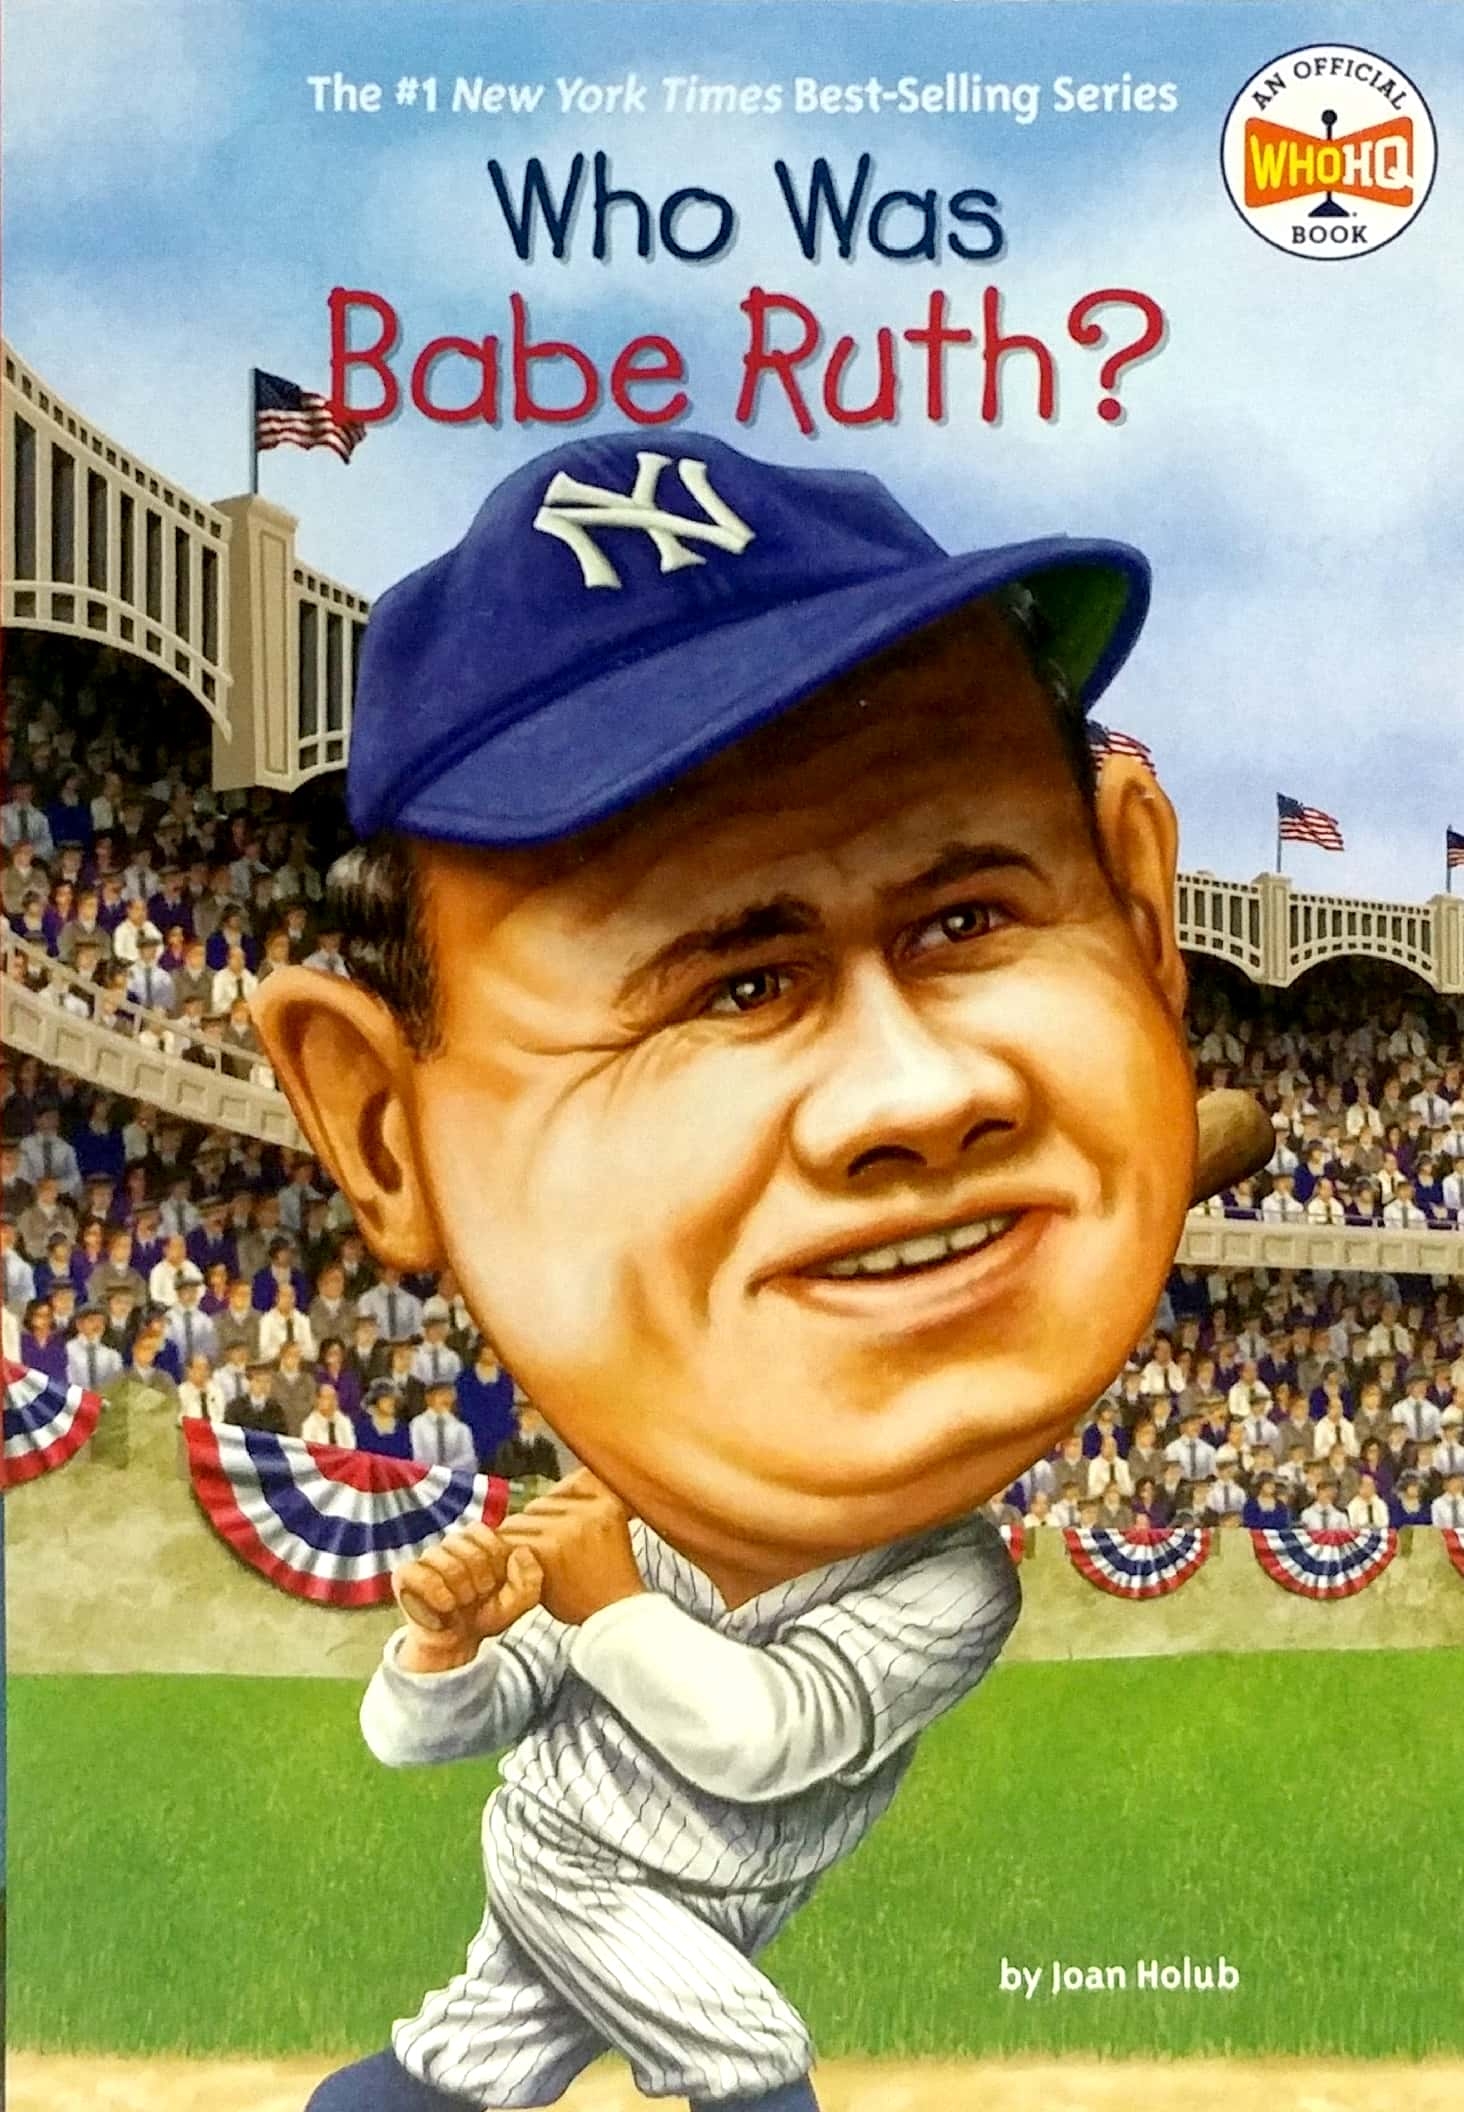 Who Was Babe Ruth?